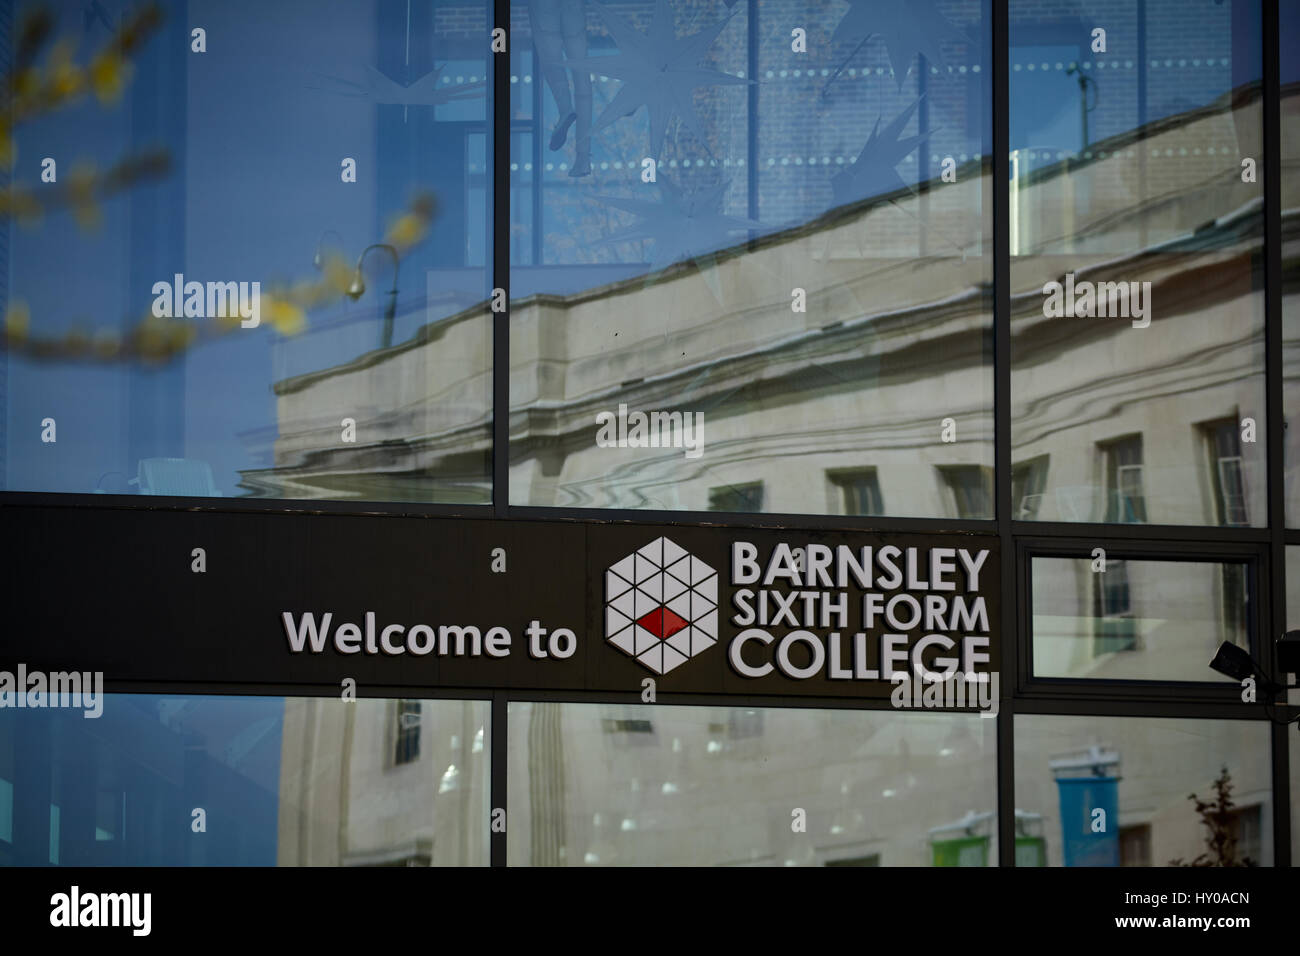 Barnsley Sixth Form College reflects the Town hall in its window, Barnsley town centre, South Yorkshire, England. UK. Stock Photo